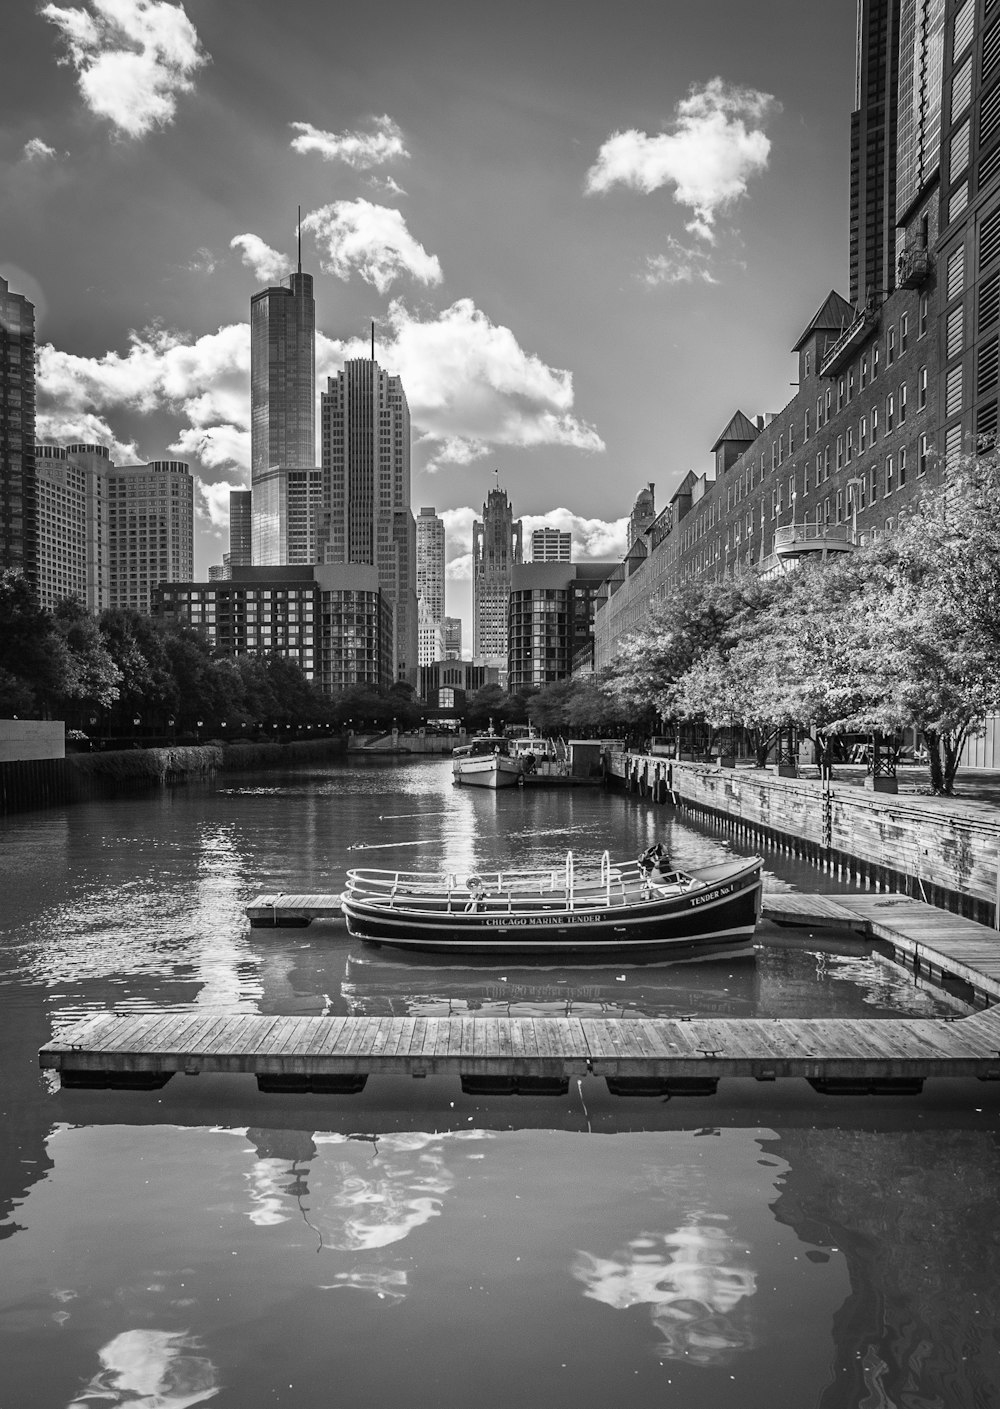 grayscale photo of boat on river near city buildings